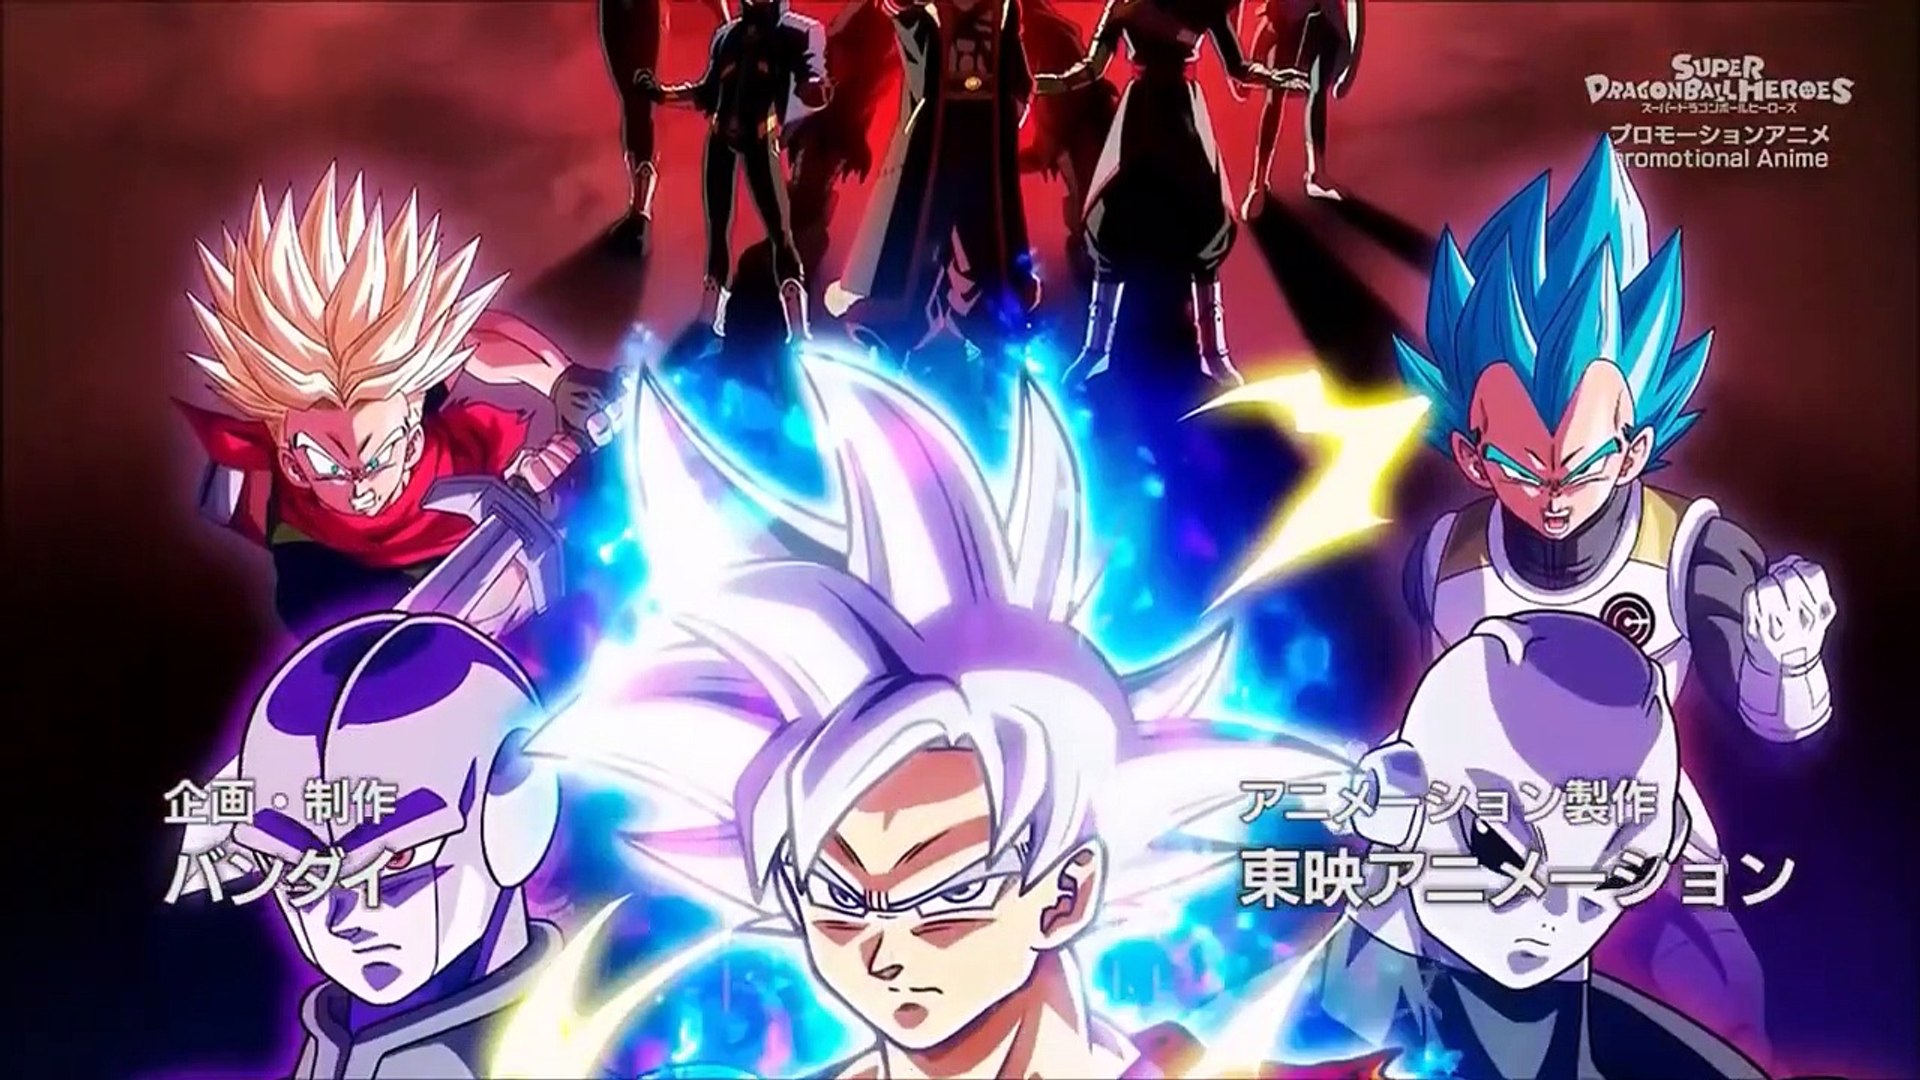 Super Dragon Ball Heroes Episode 7 English Subbed! - video Dailymotion